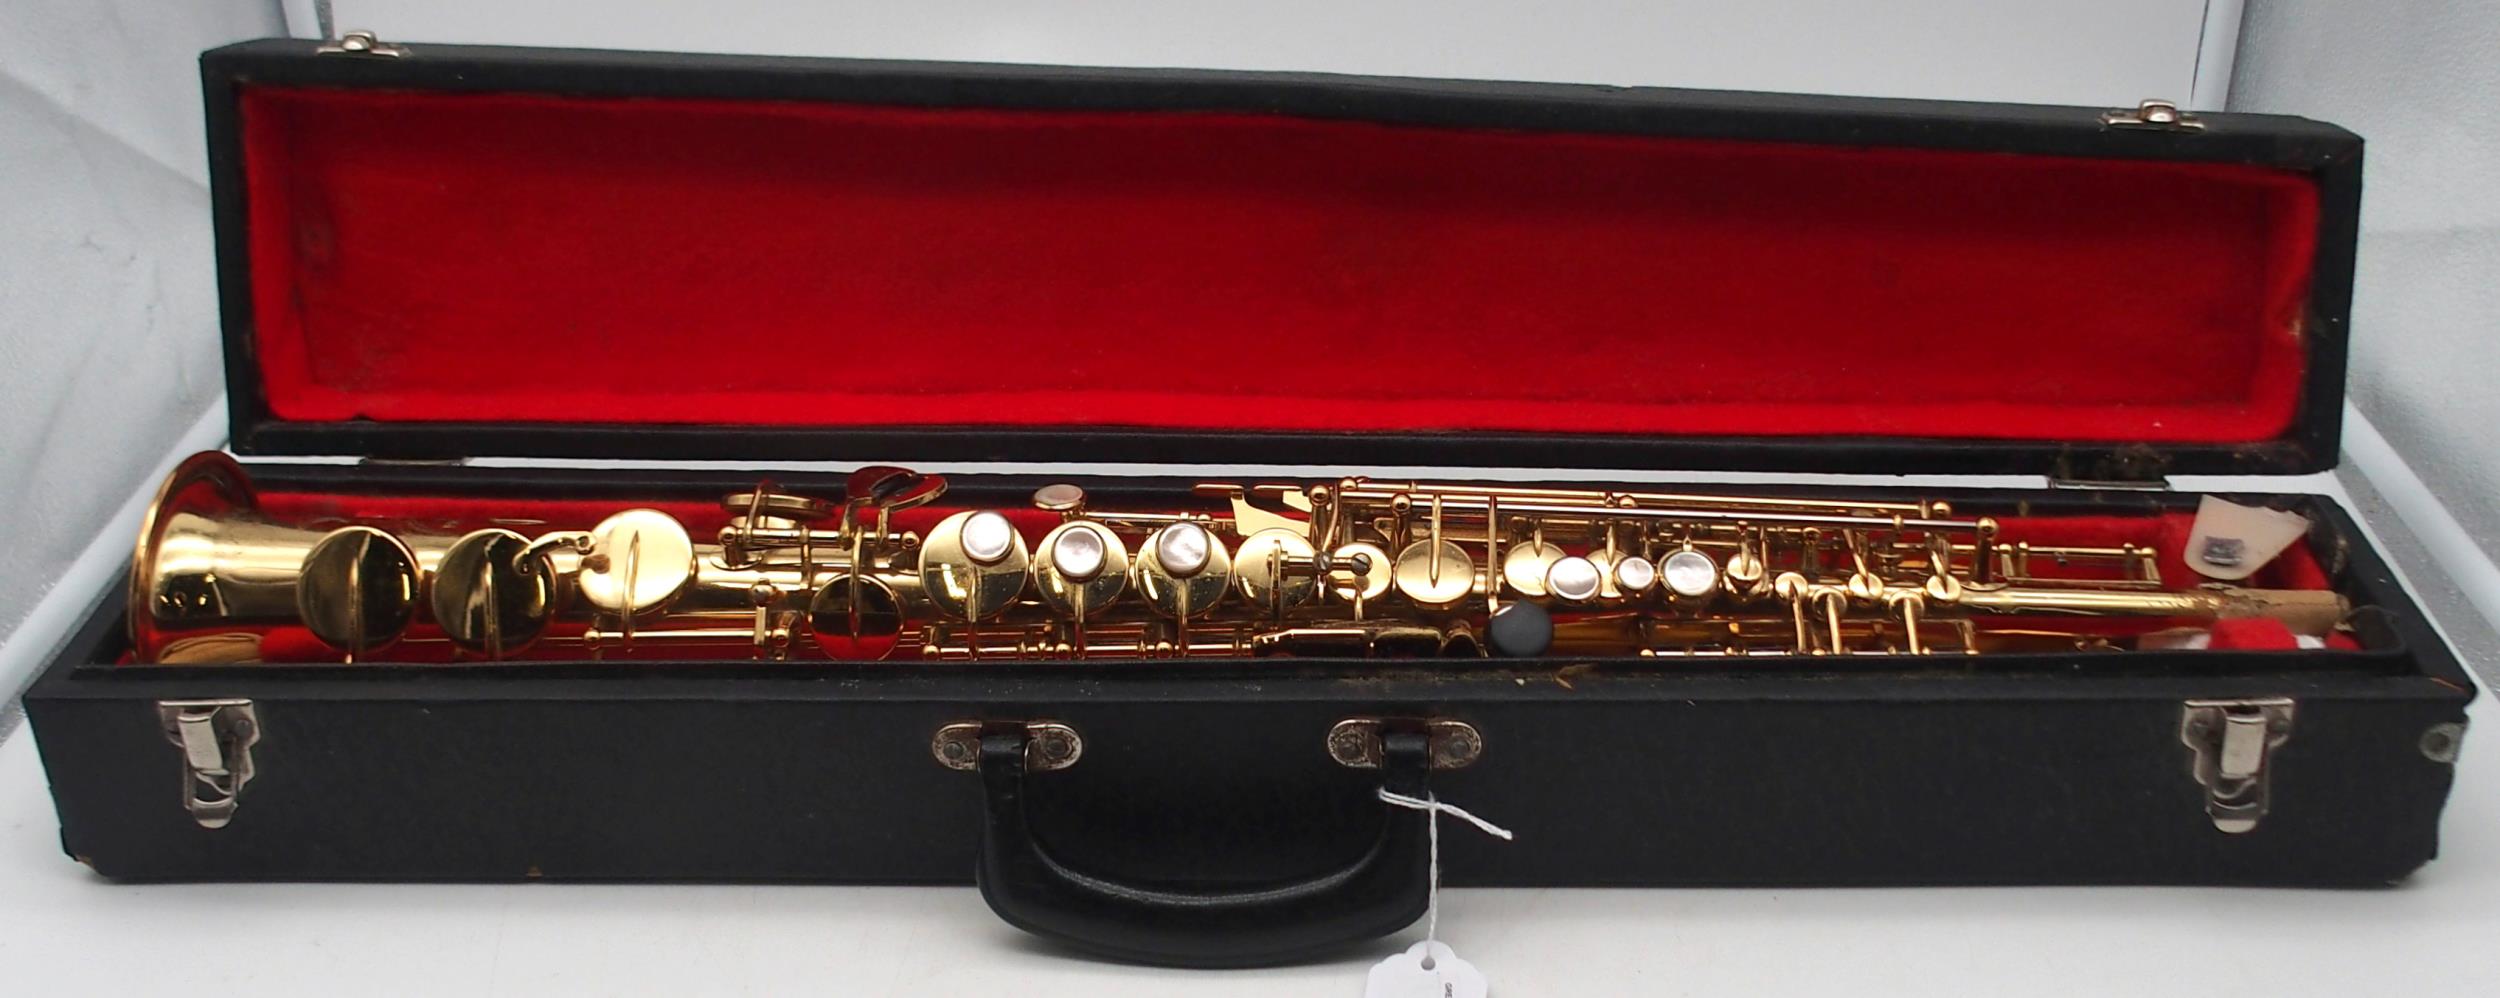 C.G. CONN a white metal soprano saxophone Made by C.G. CONN ELKHART IND. U.S.A. PATD. DEC. 8. 1914 - Image 11 of 11